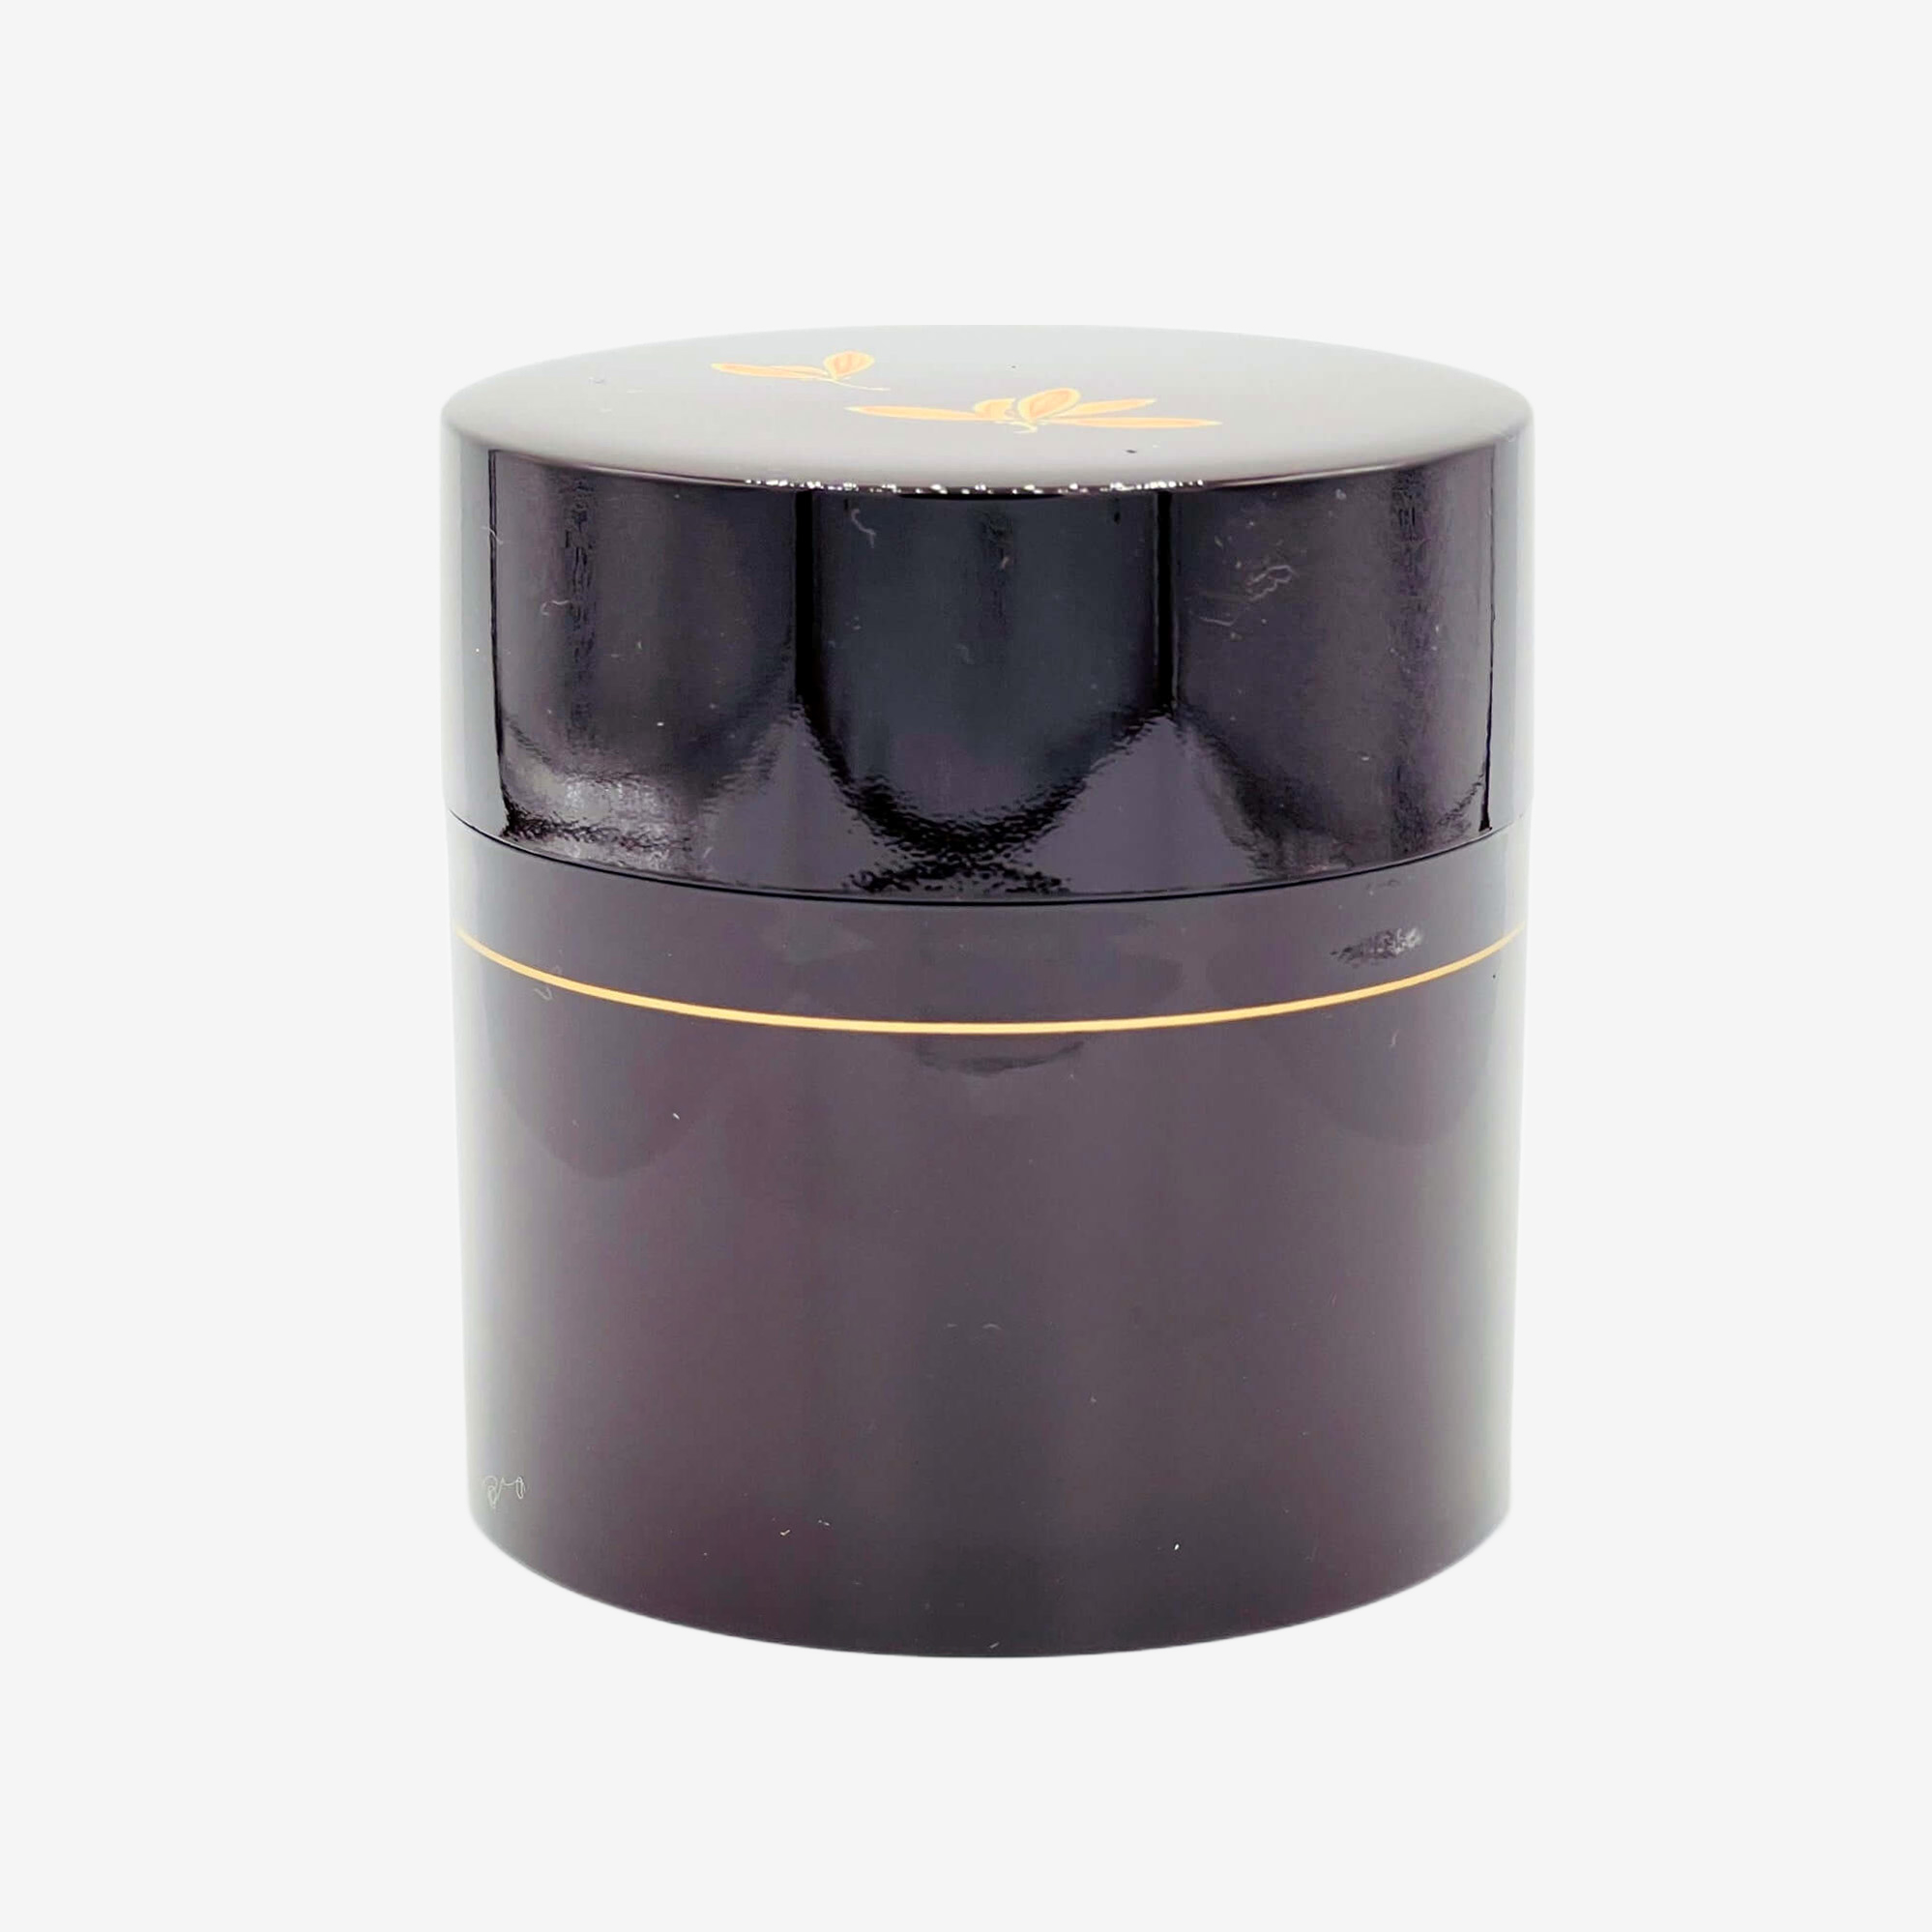 Tame Golden Leaf Brown Resin Lacquered Tea Canister - Japanese Chazutsu Teaware Inoue Tea